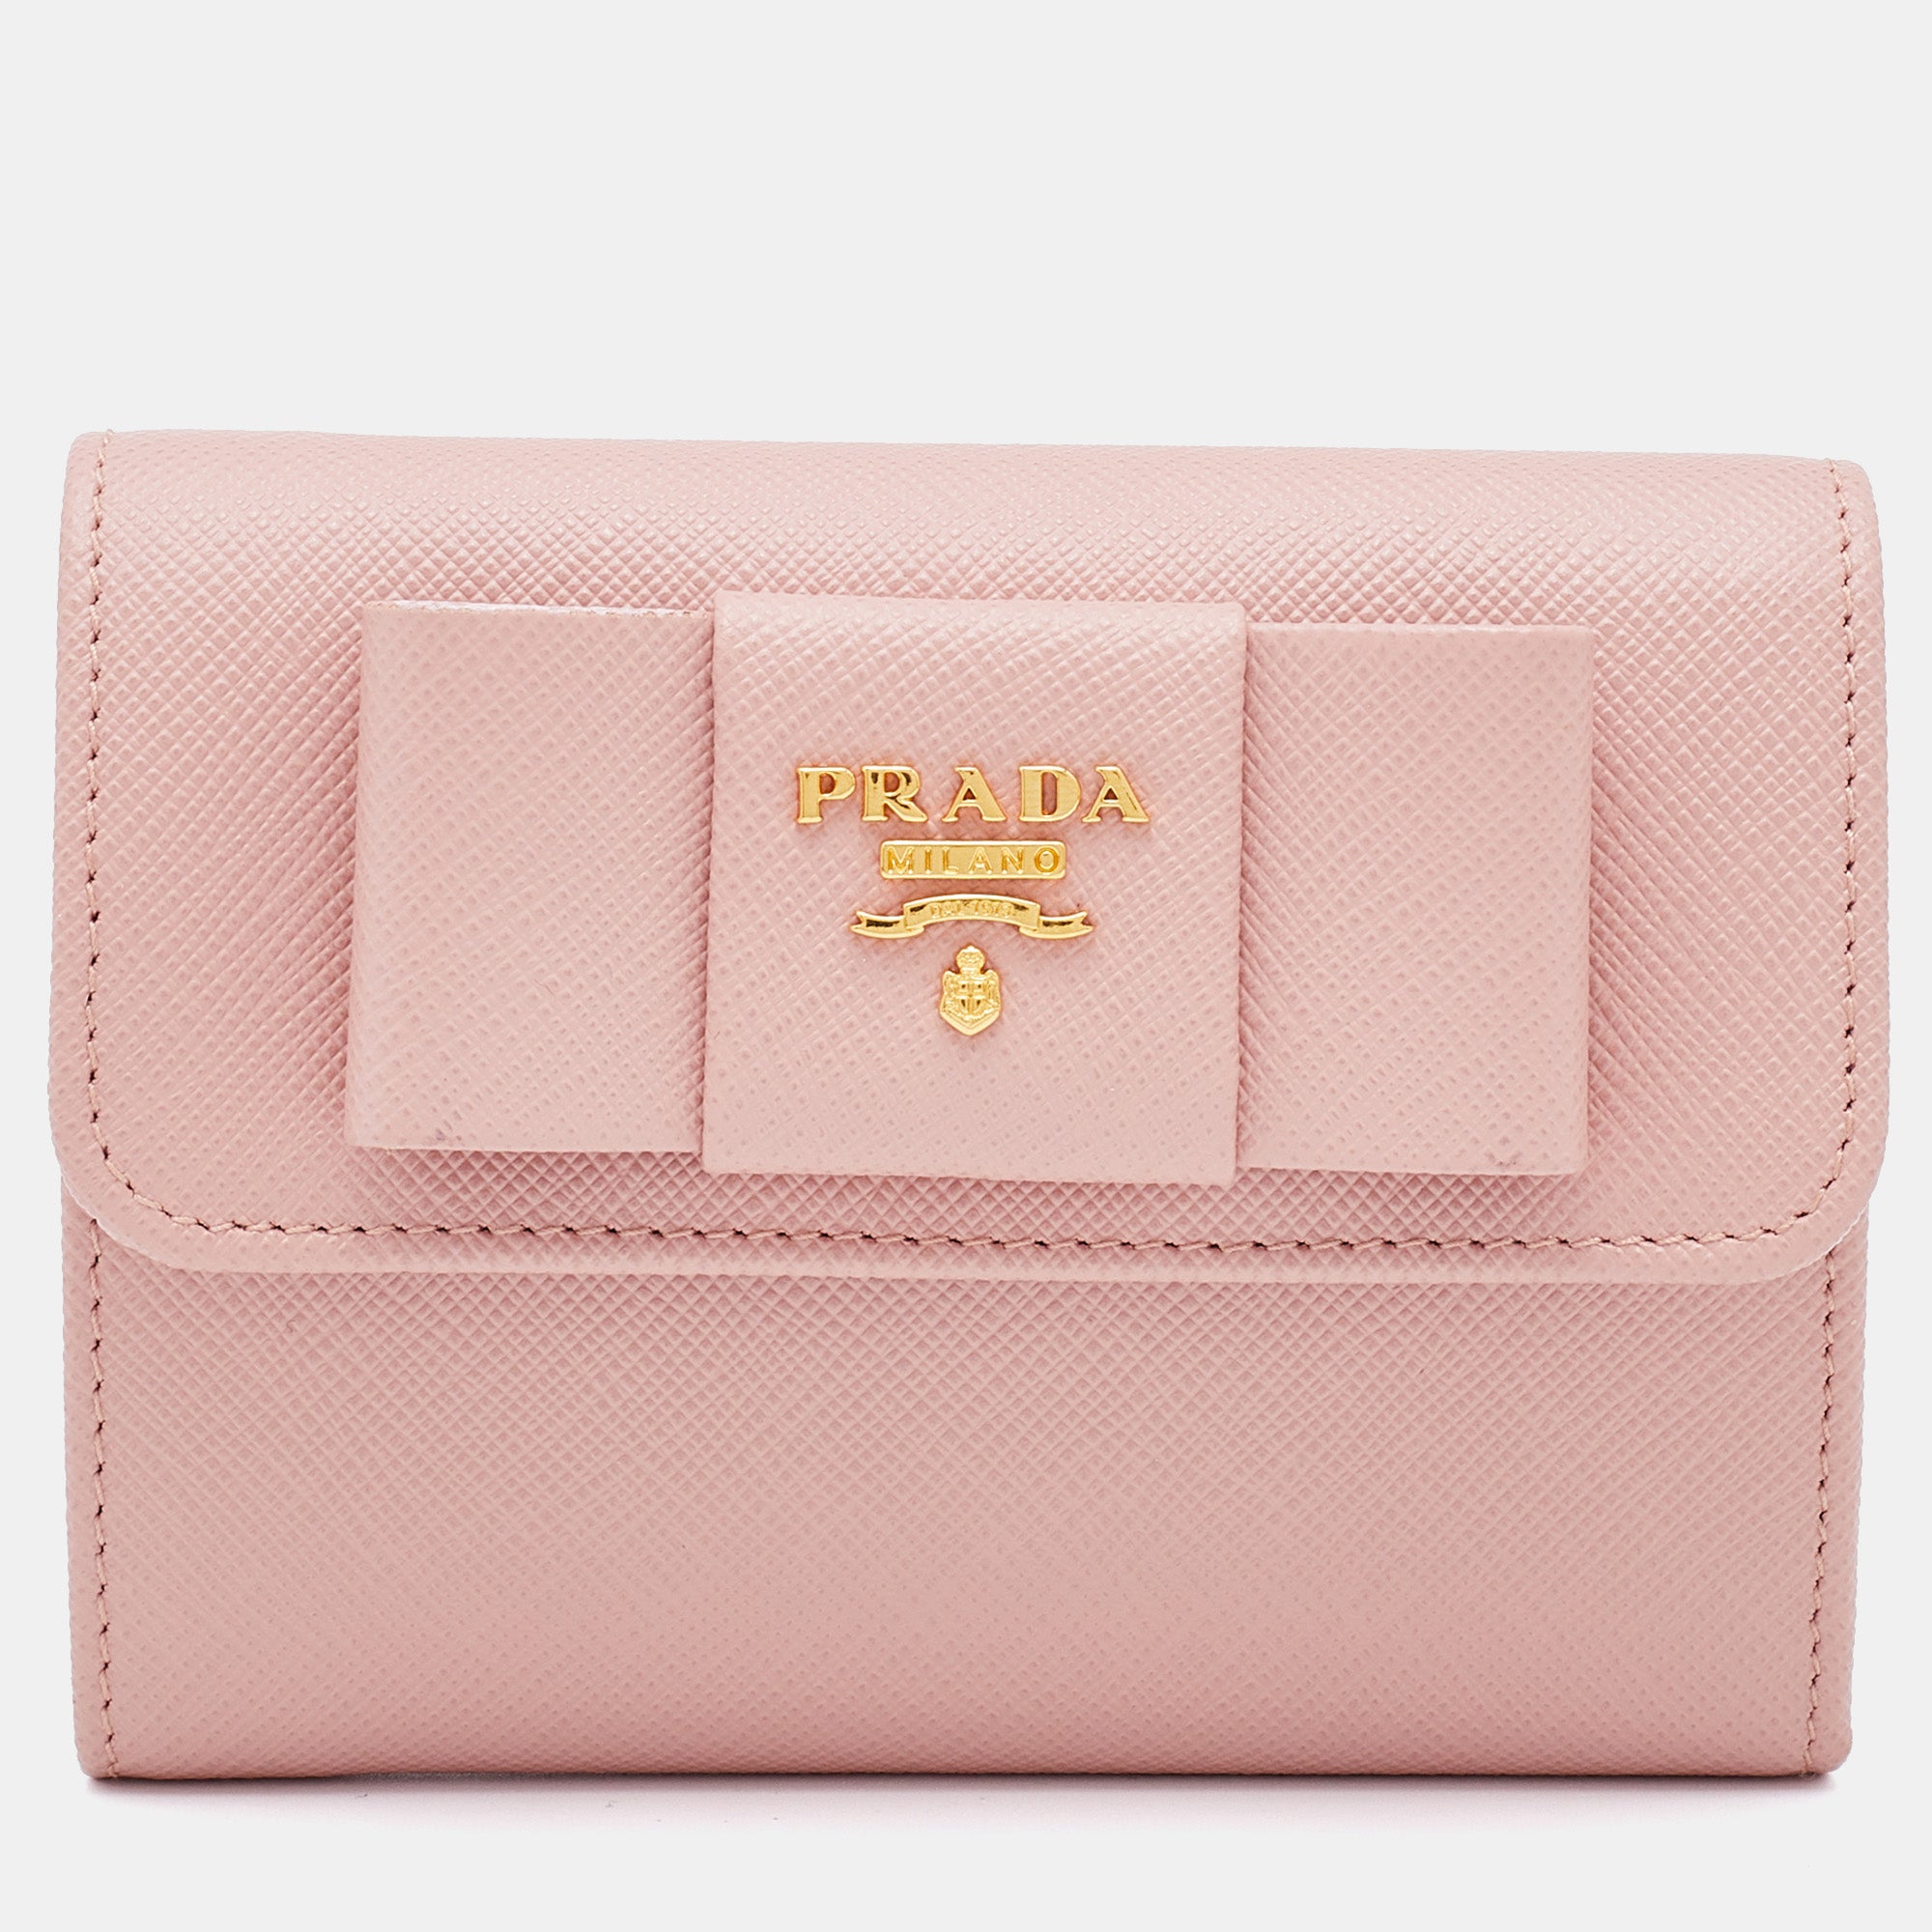 Prada Pink Saffiano Leather Bow Flap Compact Wallet